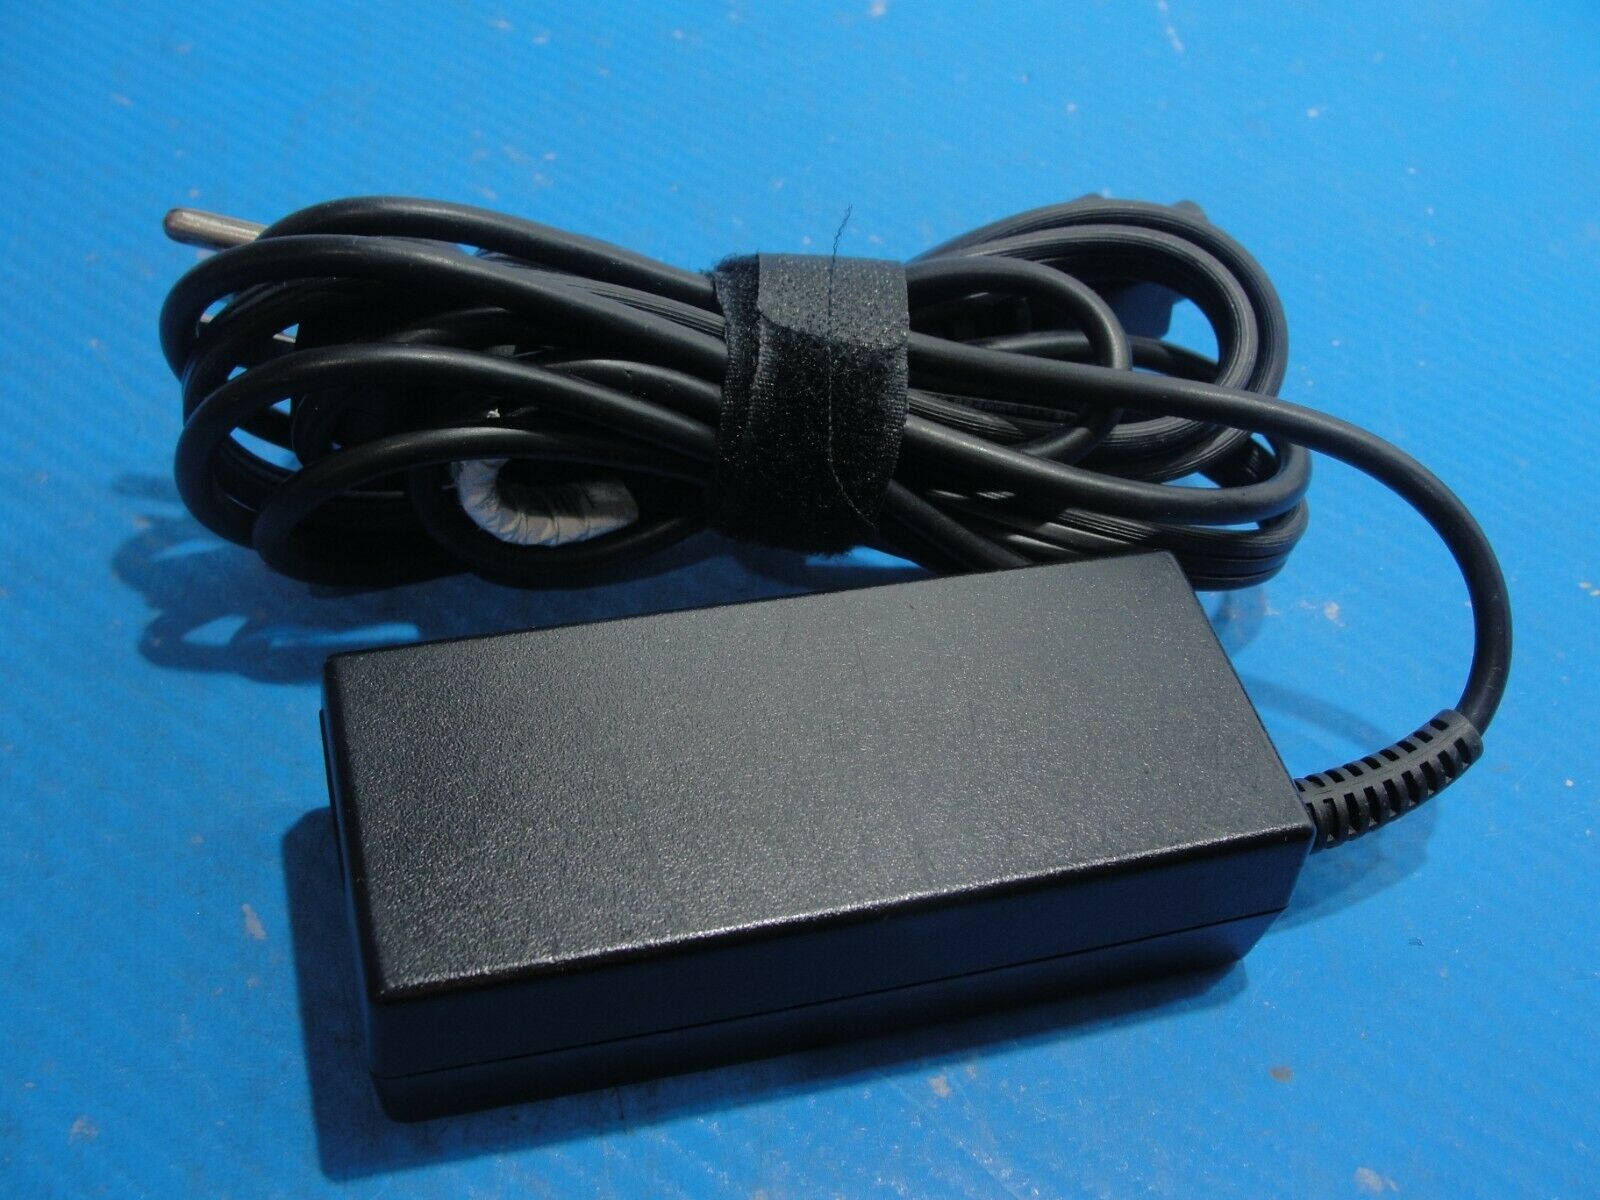 Genuine HP AC Adapter Power Charger 19.5V 3.33A 65W 710412-001 